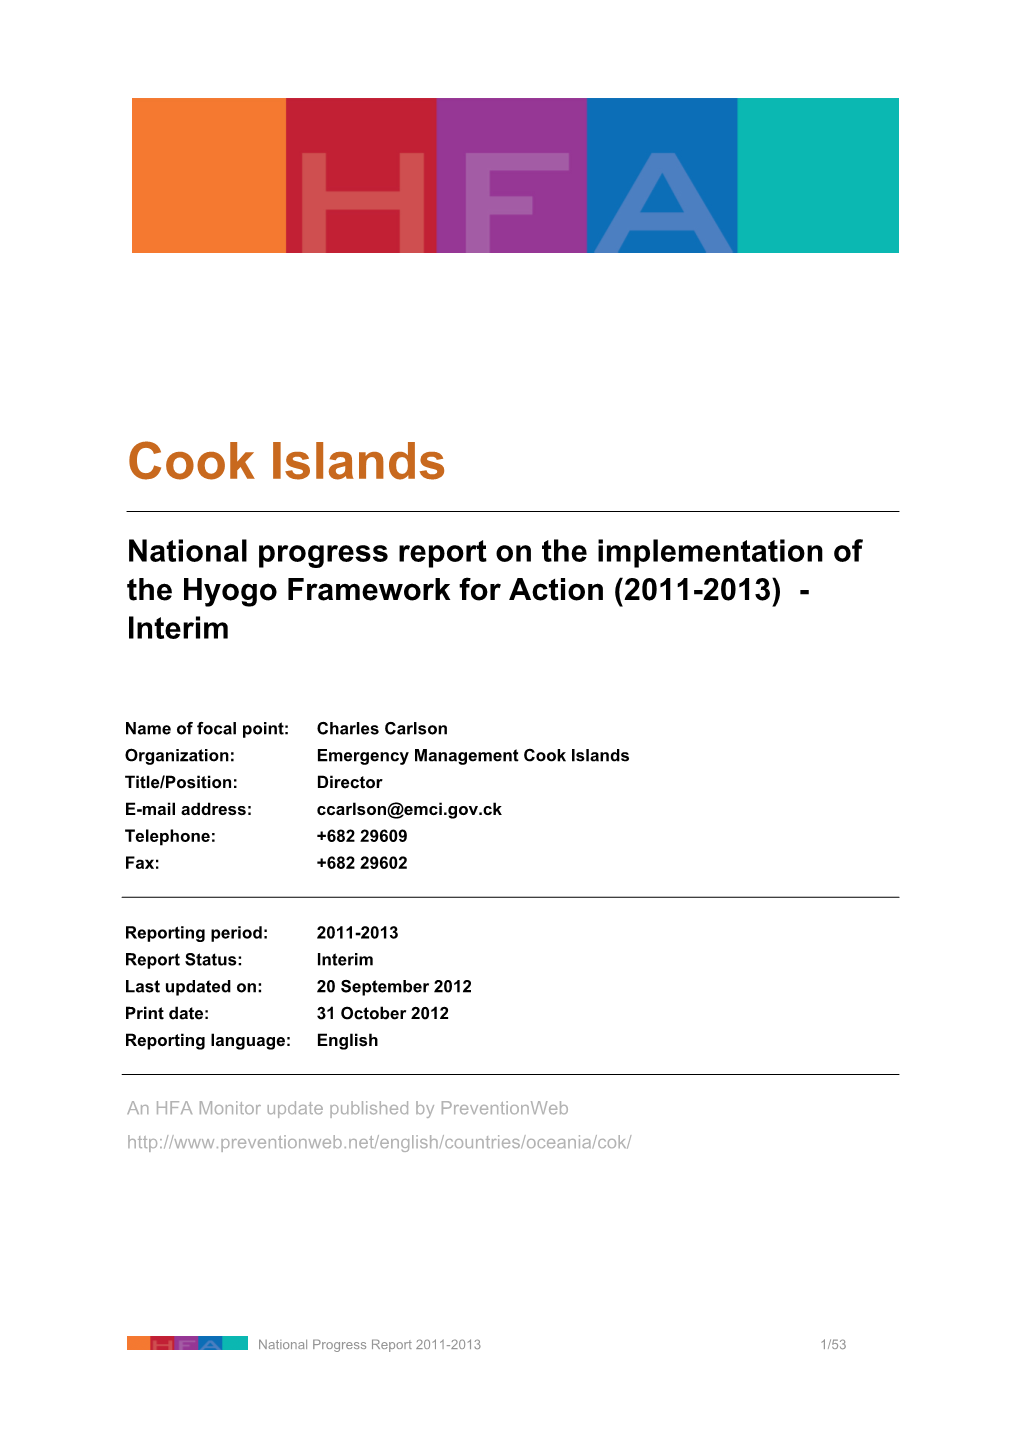 Cook Islands:National Progress Report on the Implementation of the Hyogo Framework for Action (2011-2013)